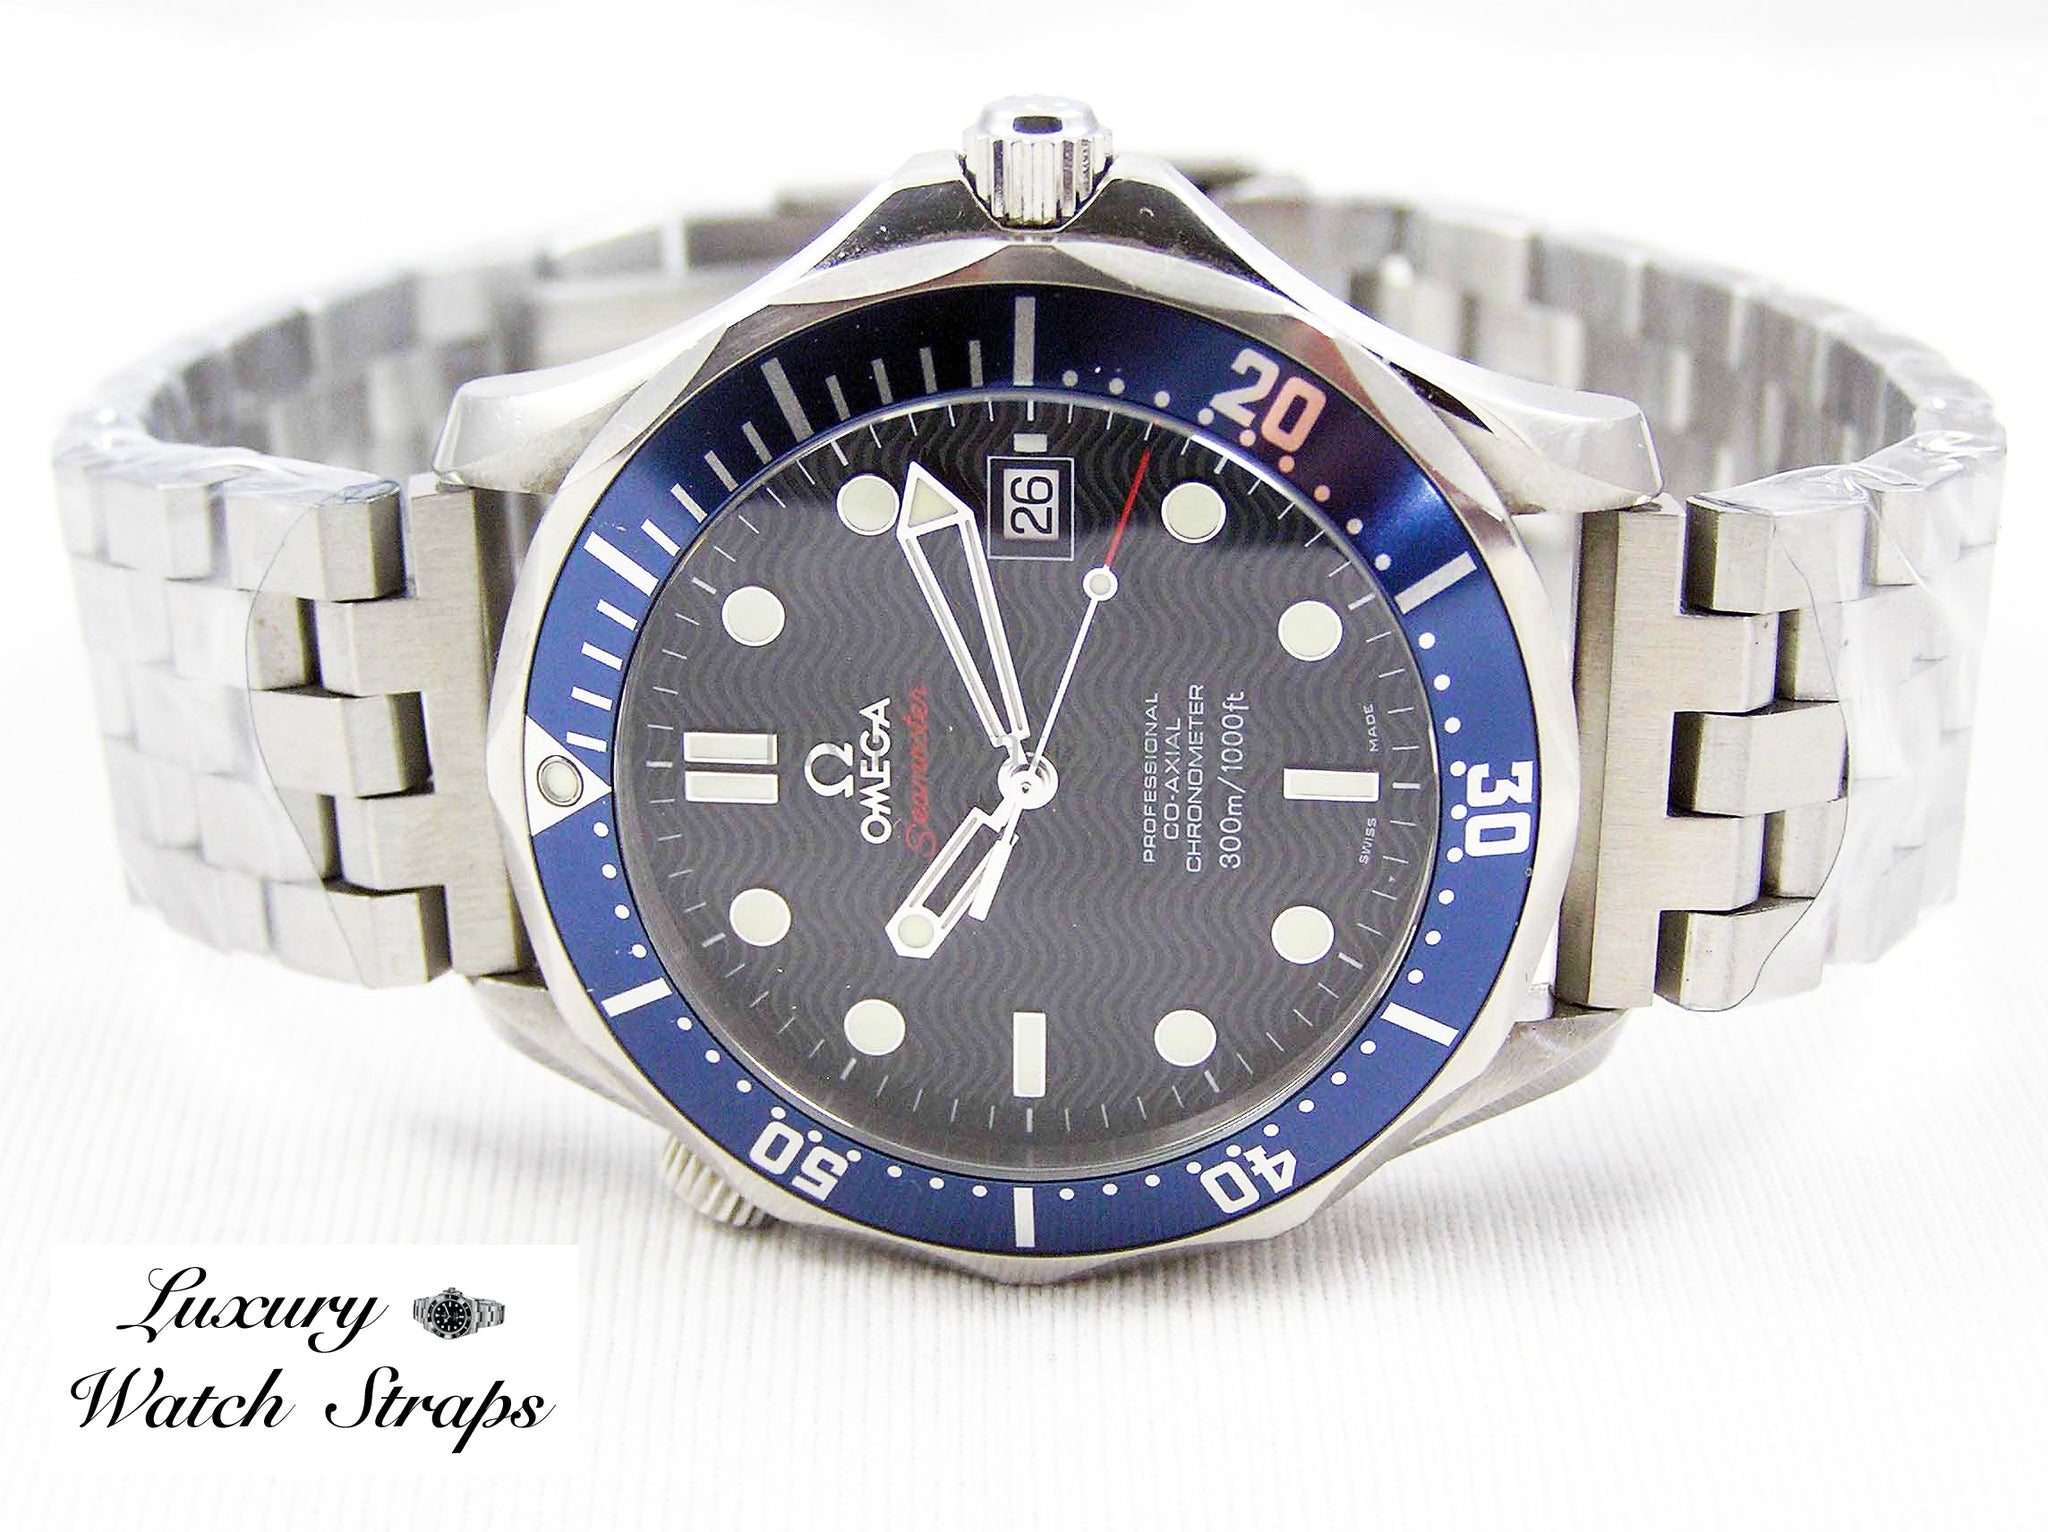 Omega Seamaster Planet Ocean Stahl Automatik Herrenuhr 2208.50.00 for  Rs.329,076 for sale from a Trusted Seller on Chrono24